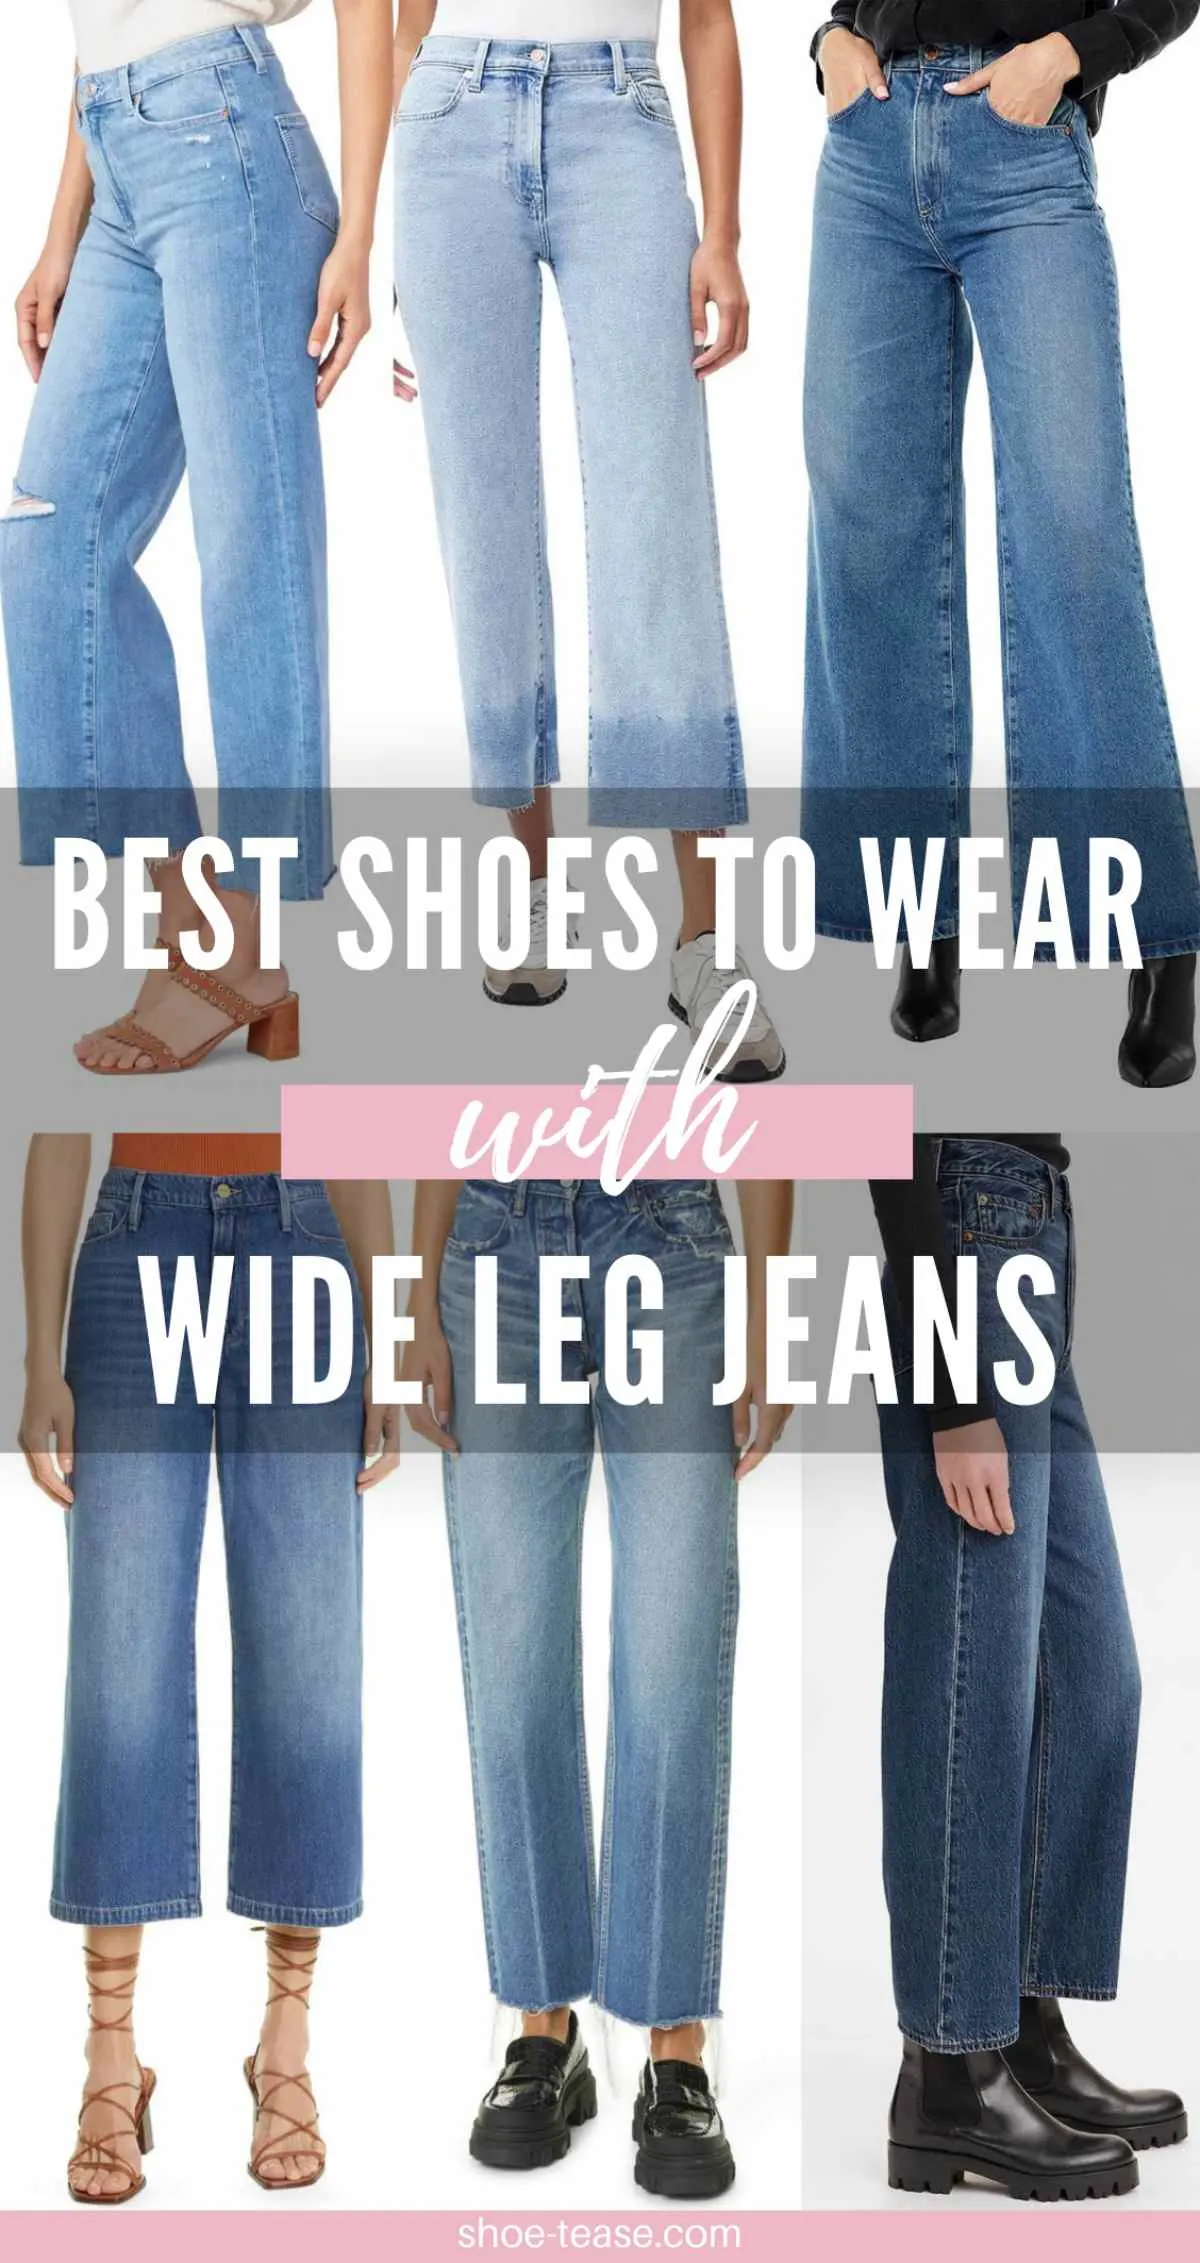 shoes to wear with wide leg jeans Post.jpg